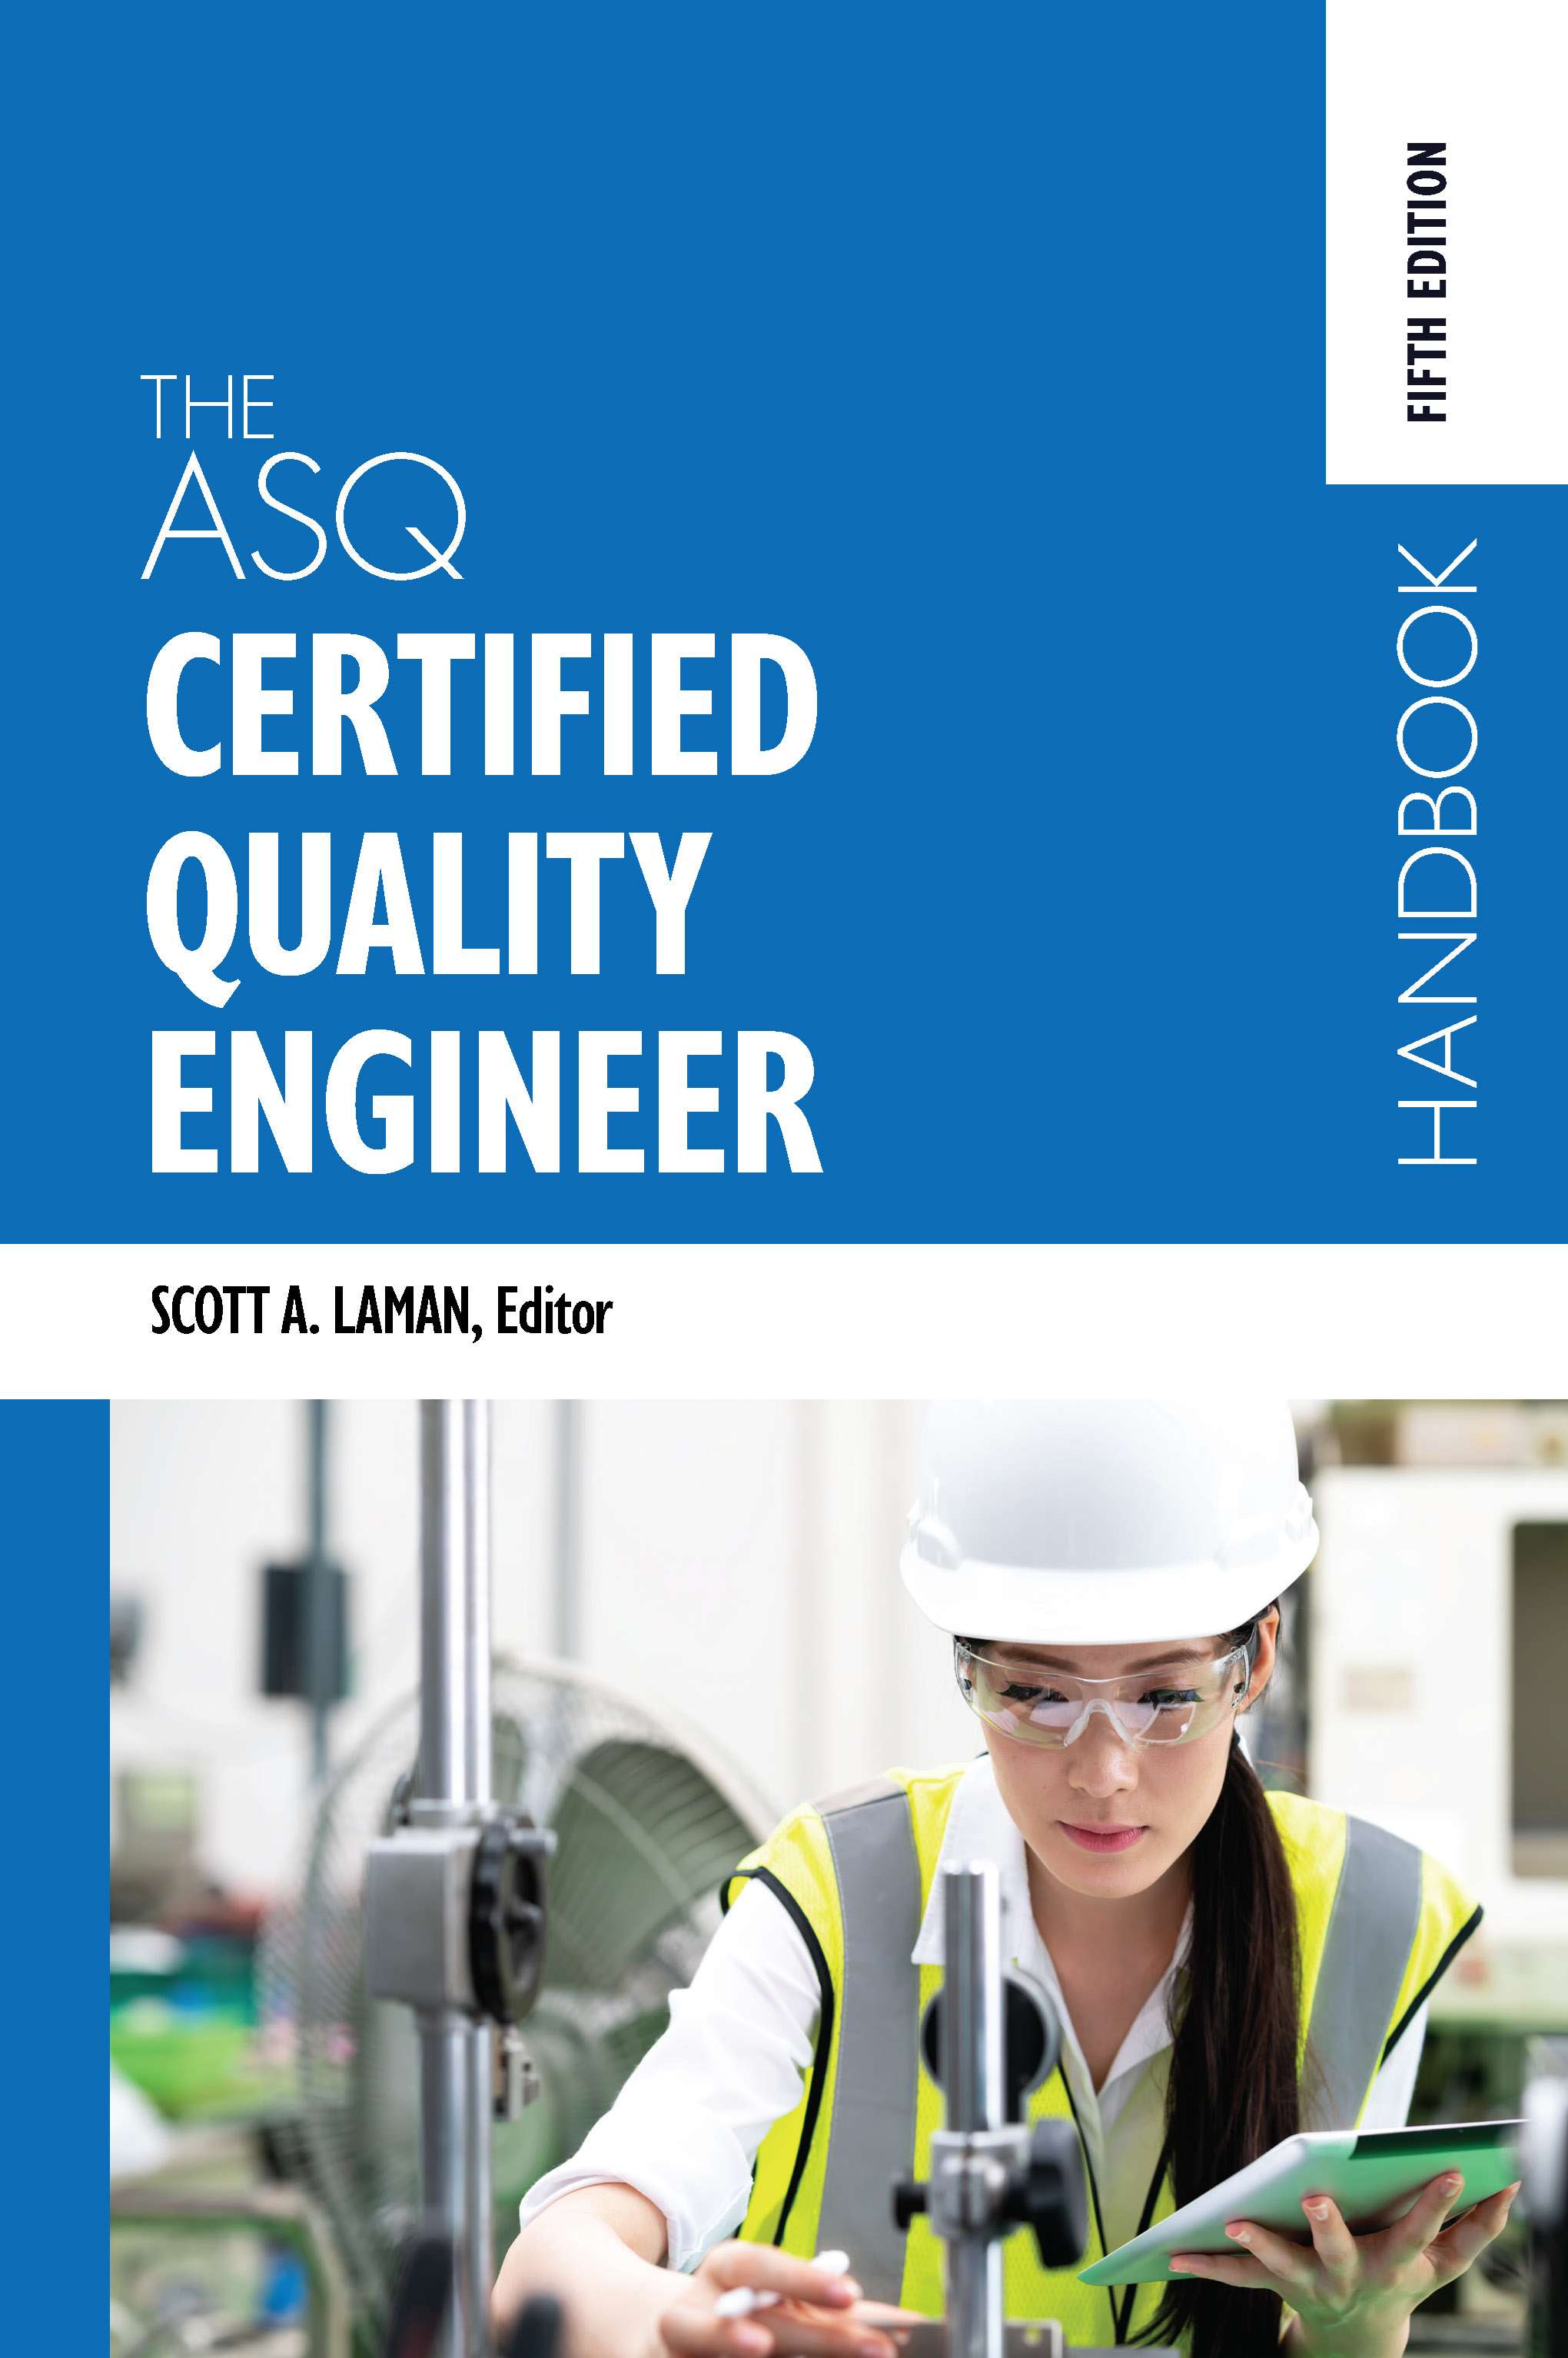 The ASQ Certified Quality Engineer Handbook, Fifth Edition